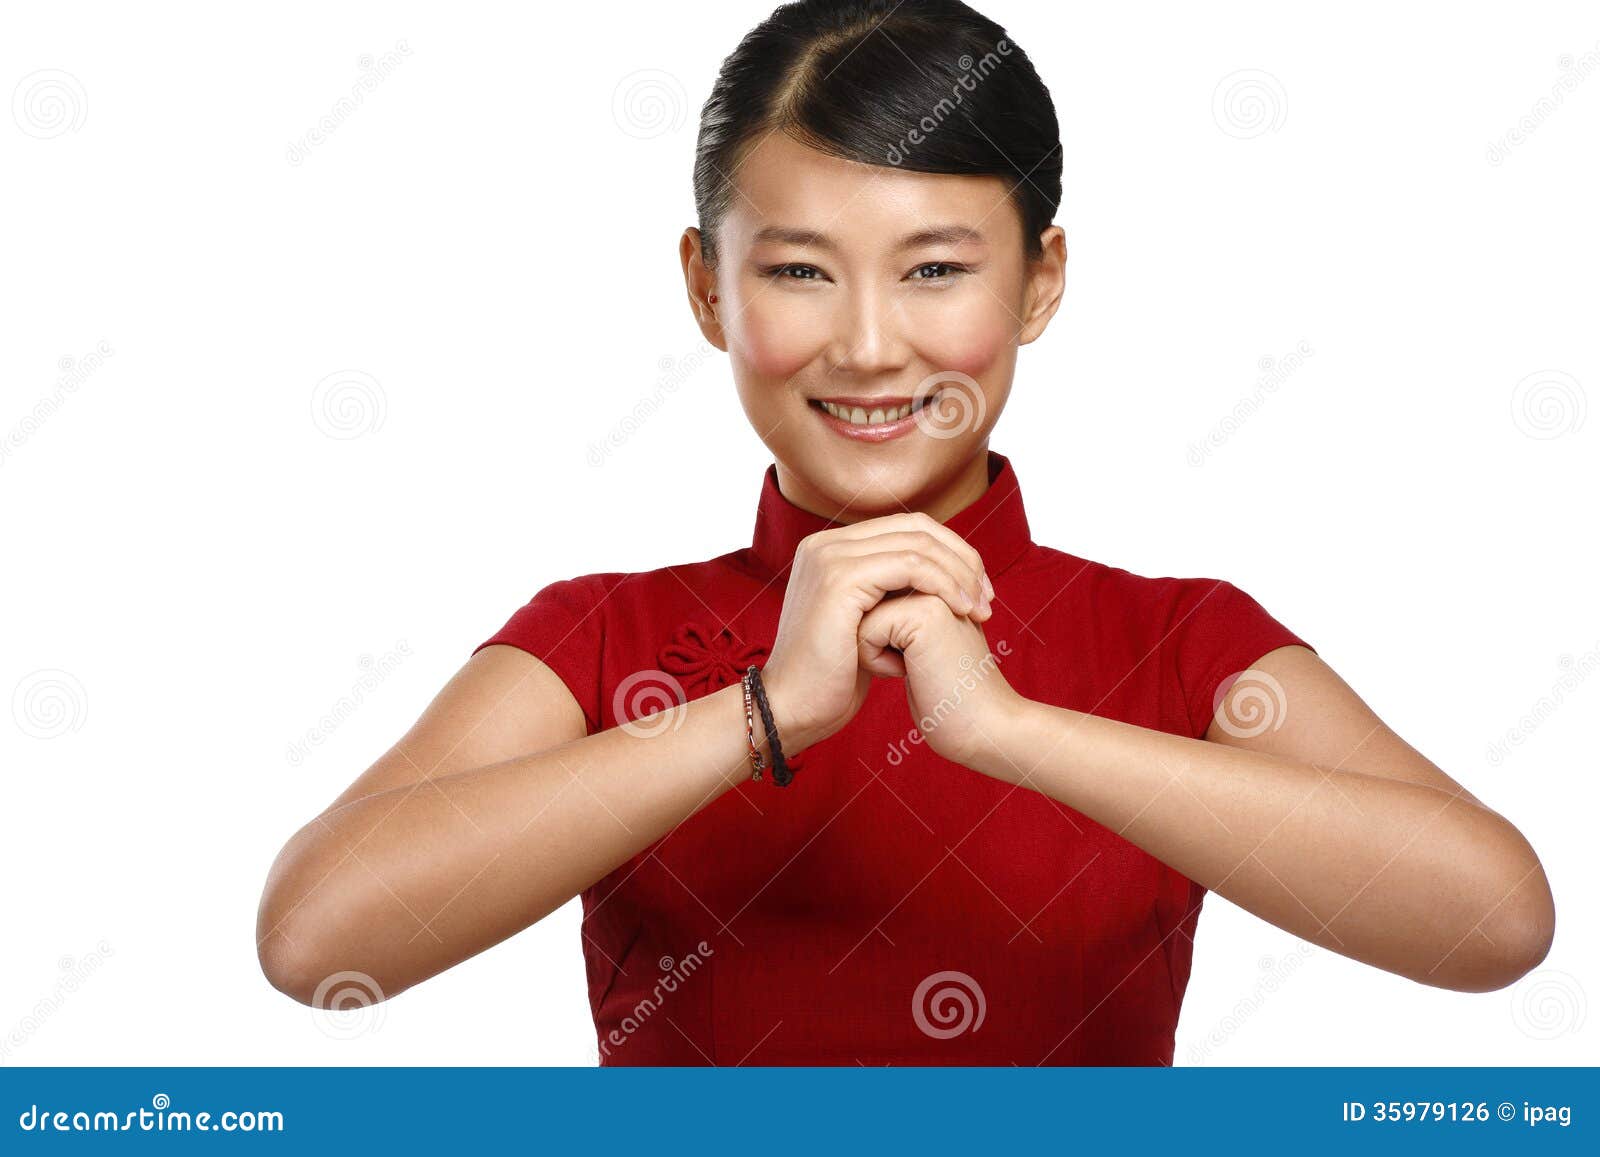 This Greeting The Asian Woman 72